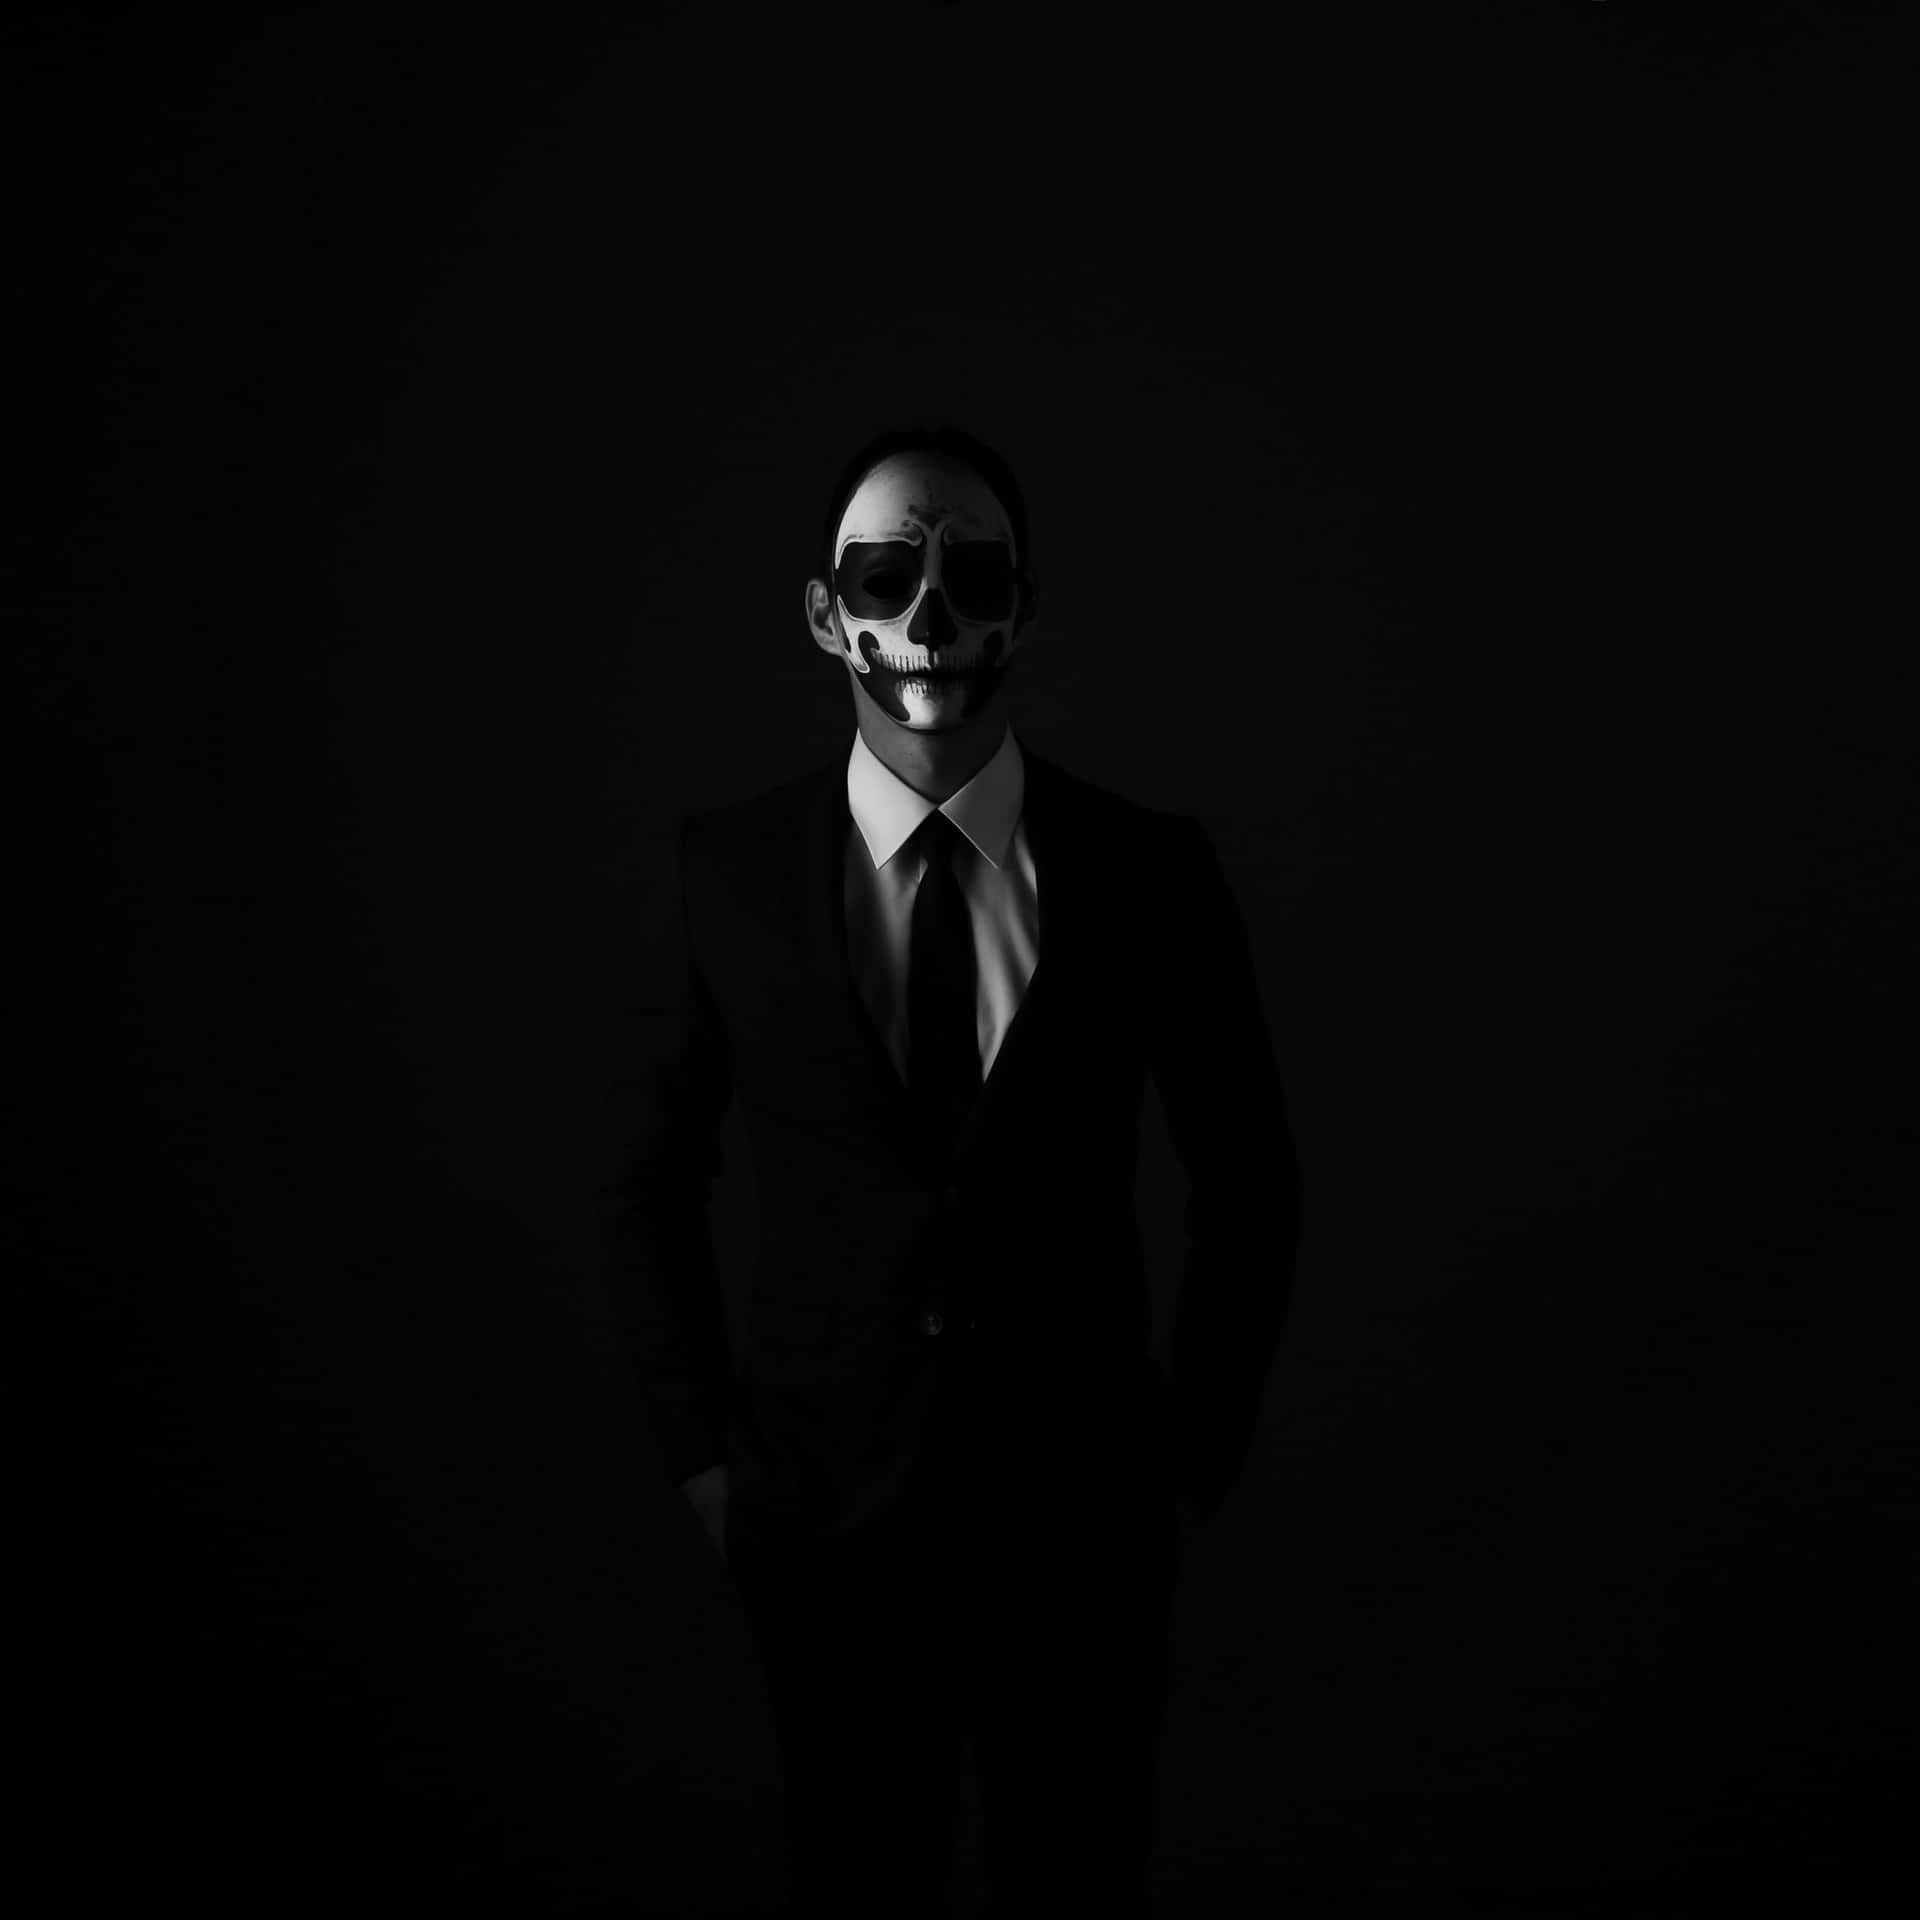 Man In Suit With Painted Face Wallpaper